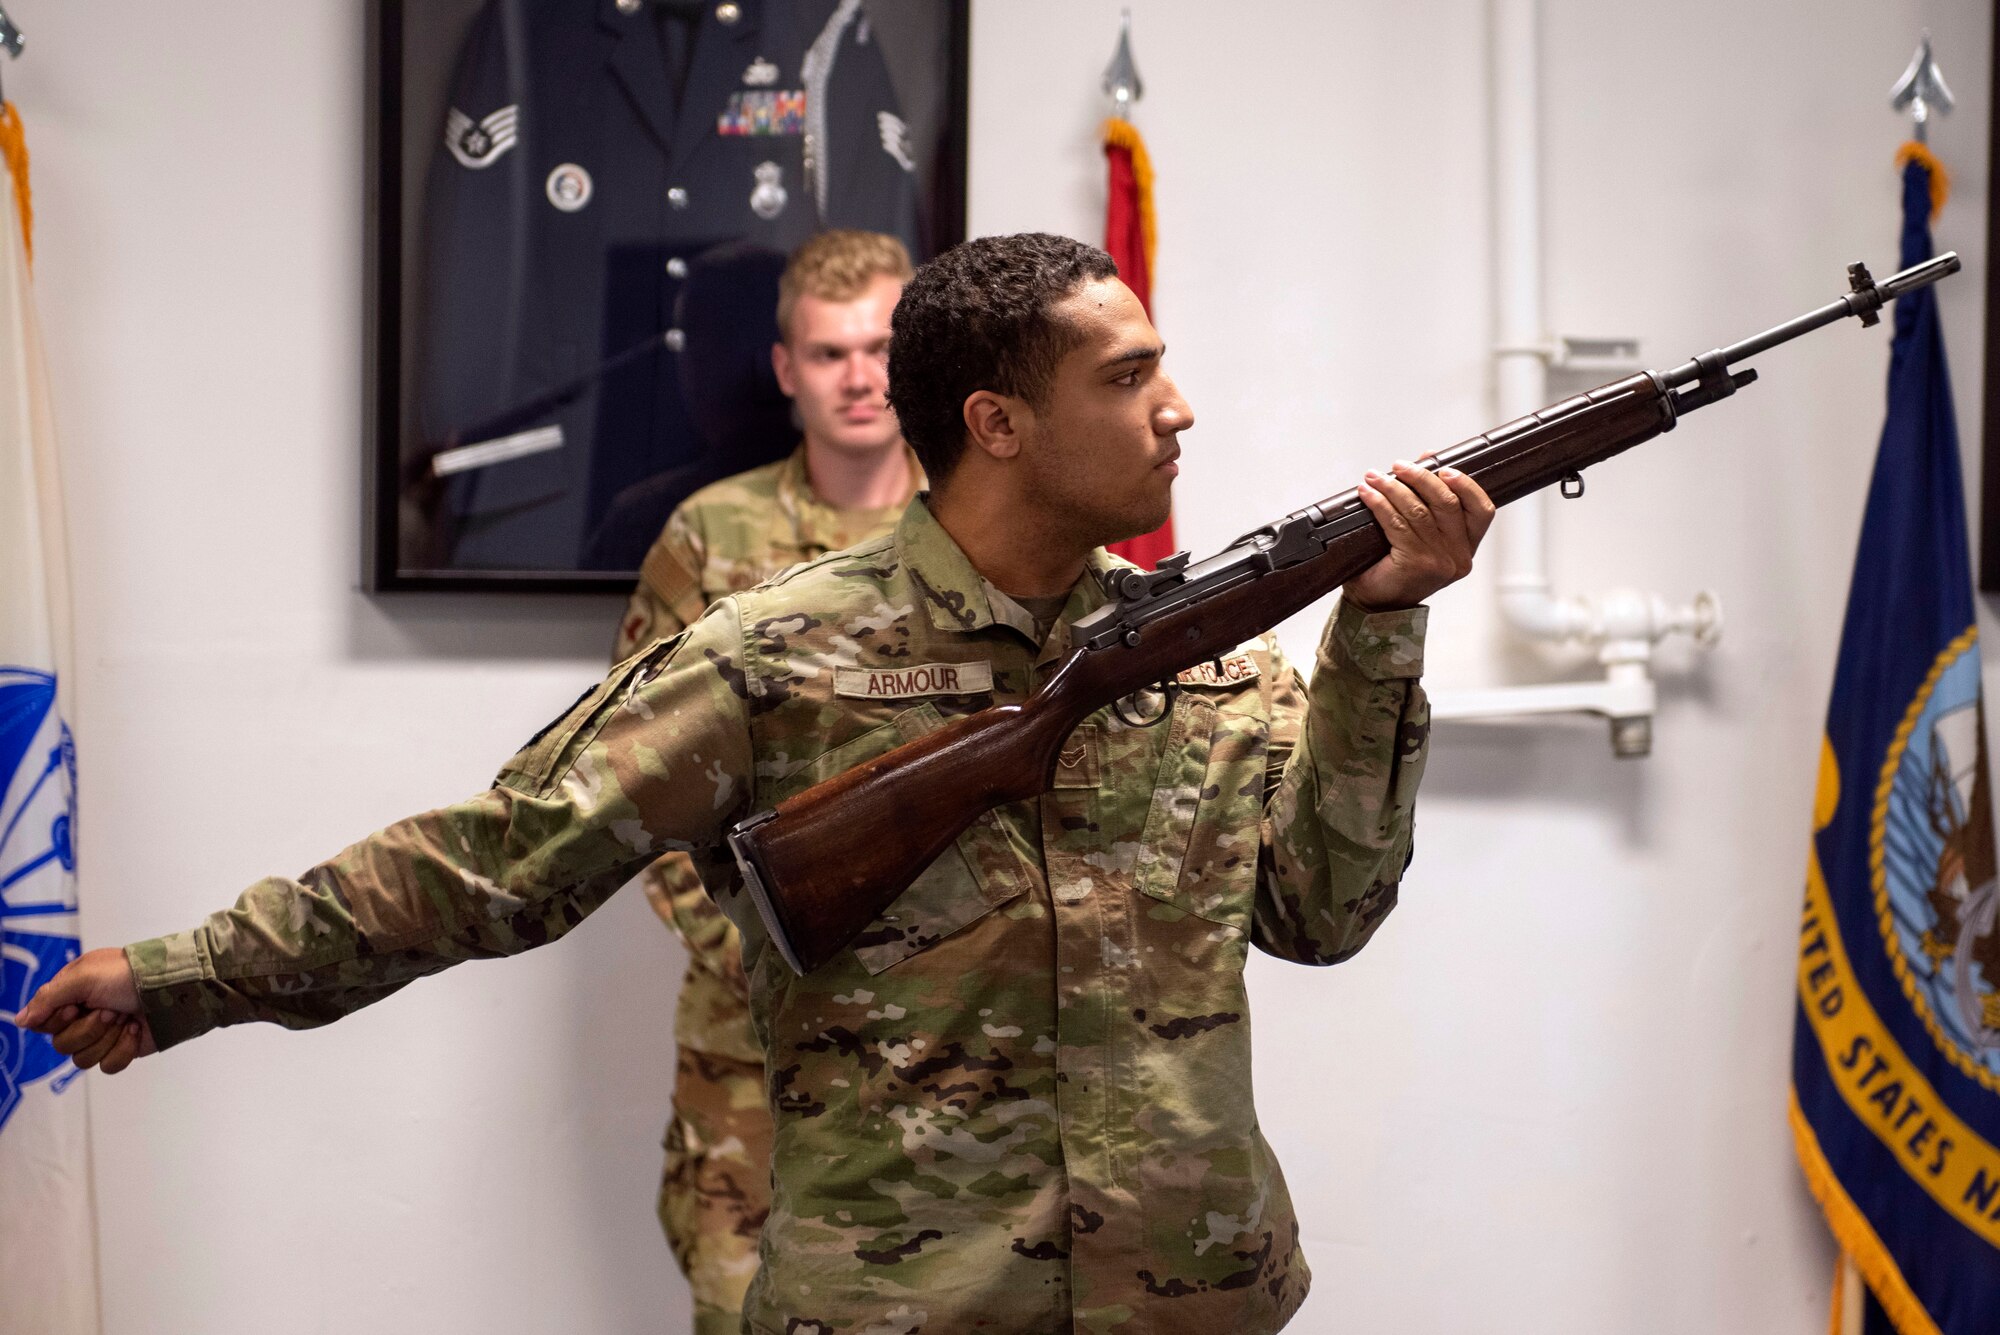 U.S. Air Force Airman 1st Class Devon Armour, a Joint Base Elmendorf-Richardson Honor Guardsman, demonstrates how to perform a rifle salute during an Honor Guard Open House at JBER, Alaska, July 19, 2021. The Honor Guard hosted the event to encourage Airmen to participate in the Honor Guard program. (U.S. Air Force photo by Senior Airman Emily Farnsworth)